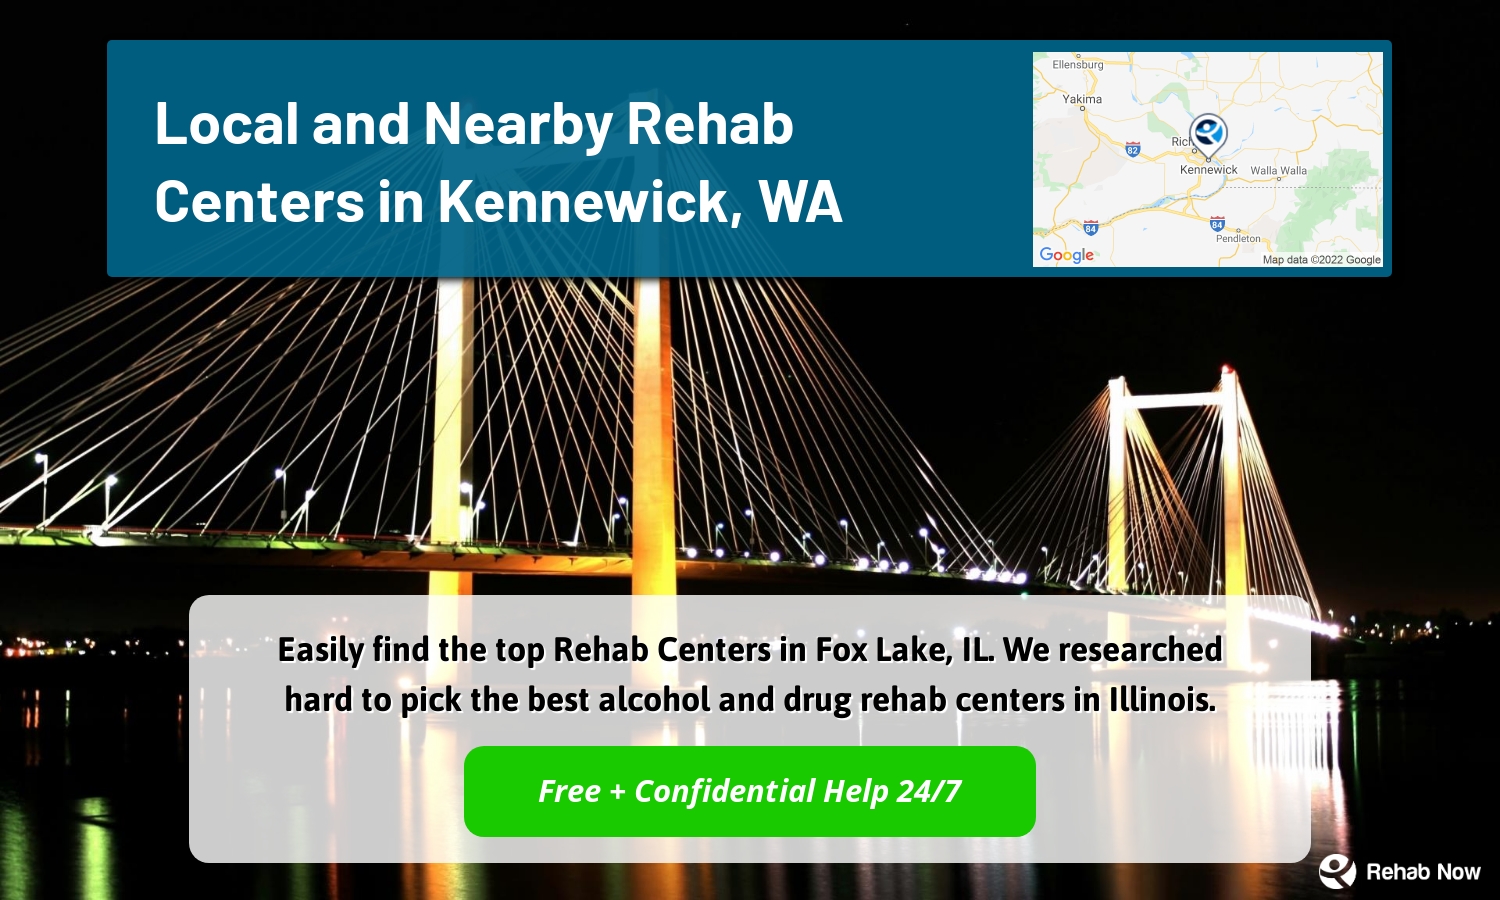 Easily find the top Rehab Centers in Fox Lake, IL. We researched hard to pick the best alcohol and drug rehab centers in Illinois.